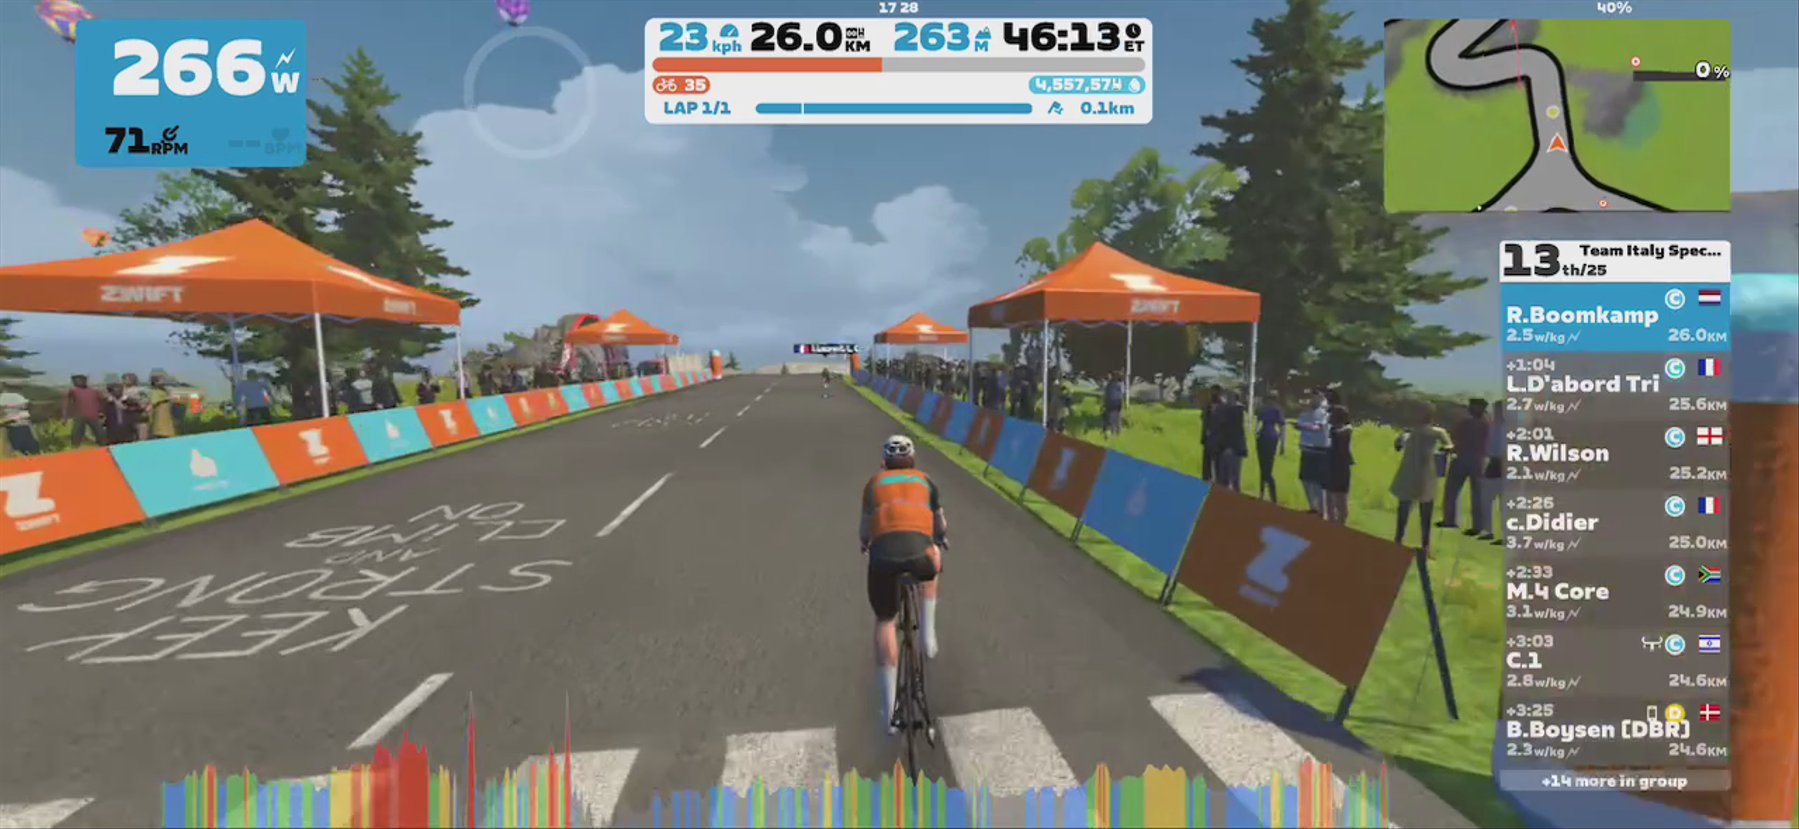 Zwift - Race: Team Italy Specialissima Race  (C) on Roule Ma Poule in France